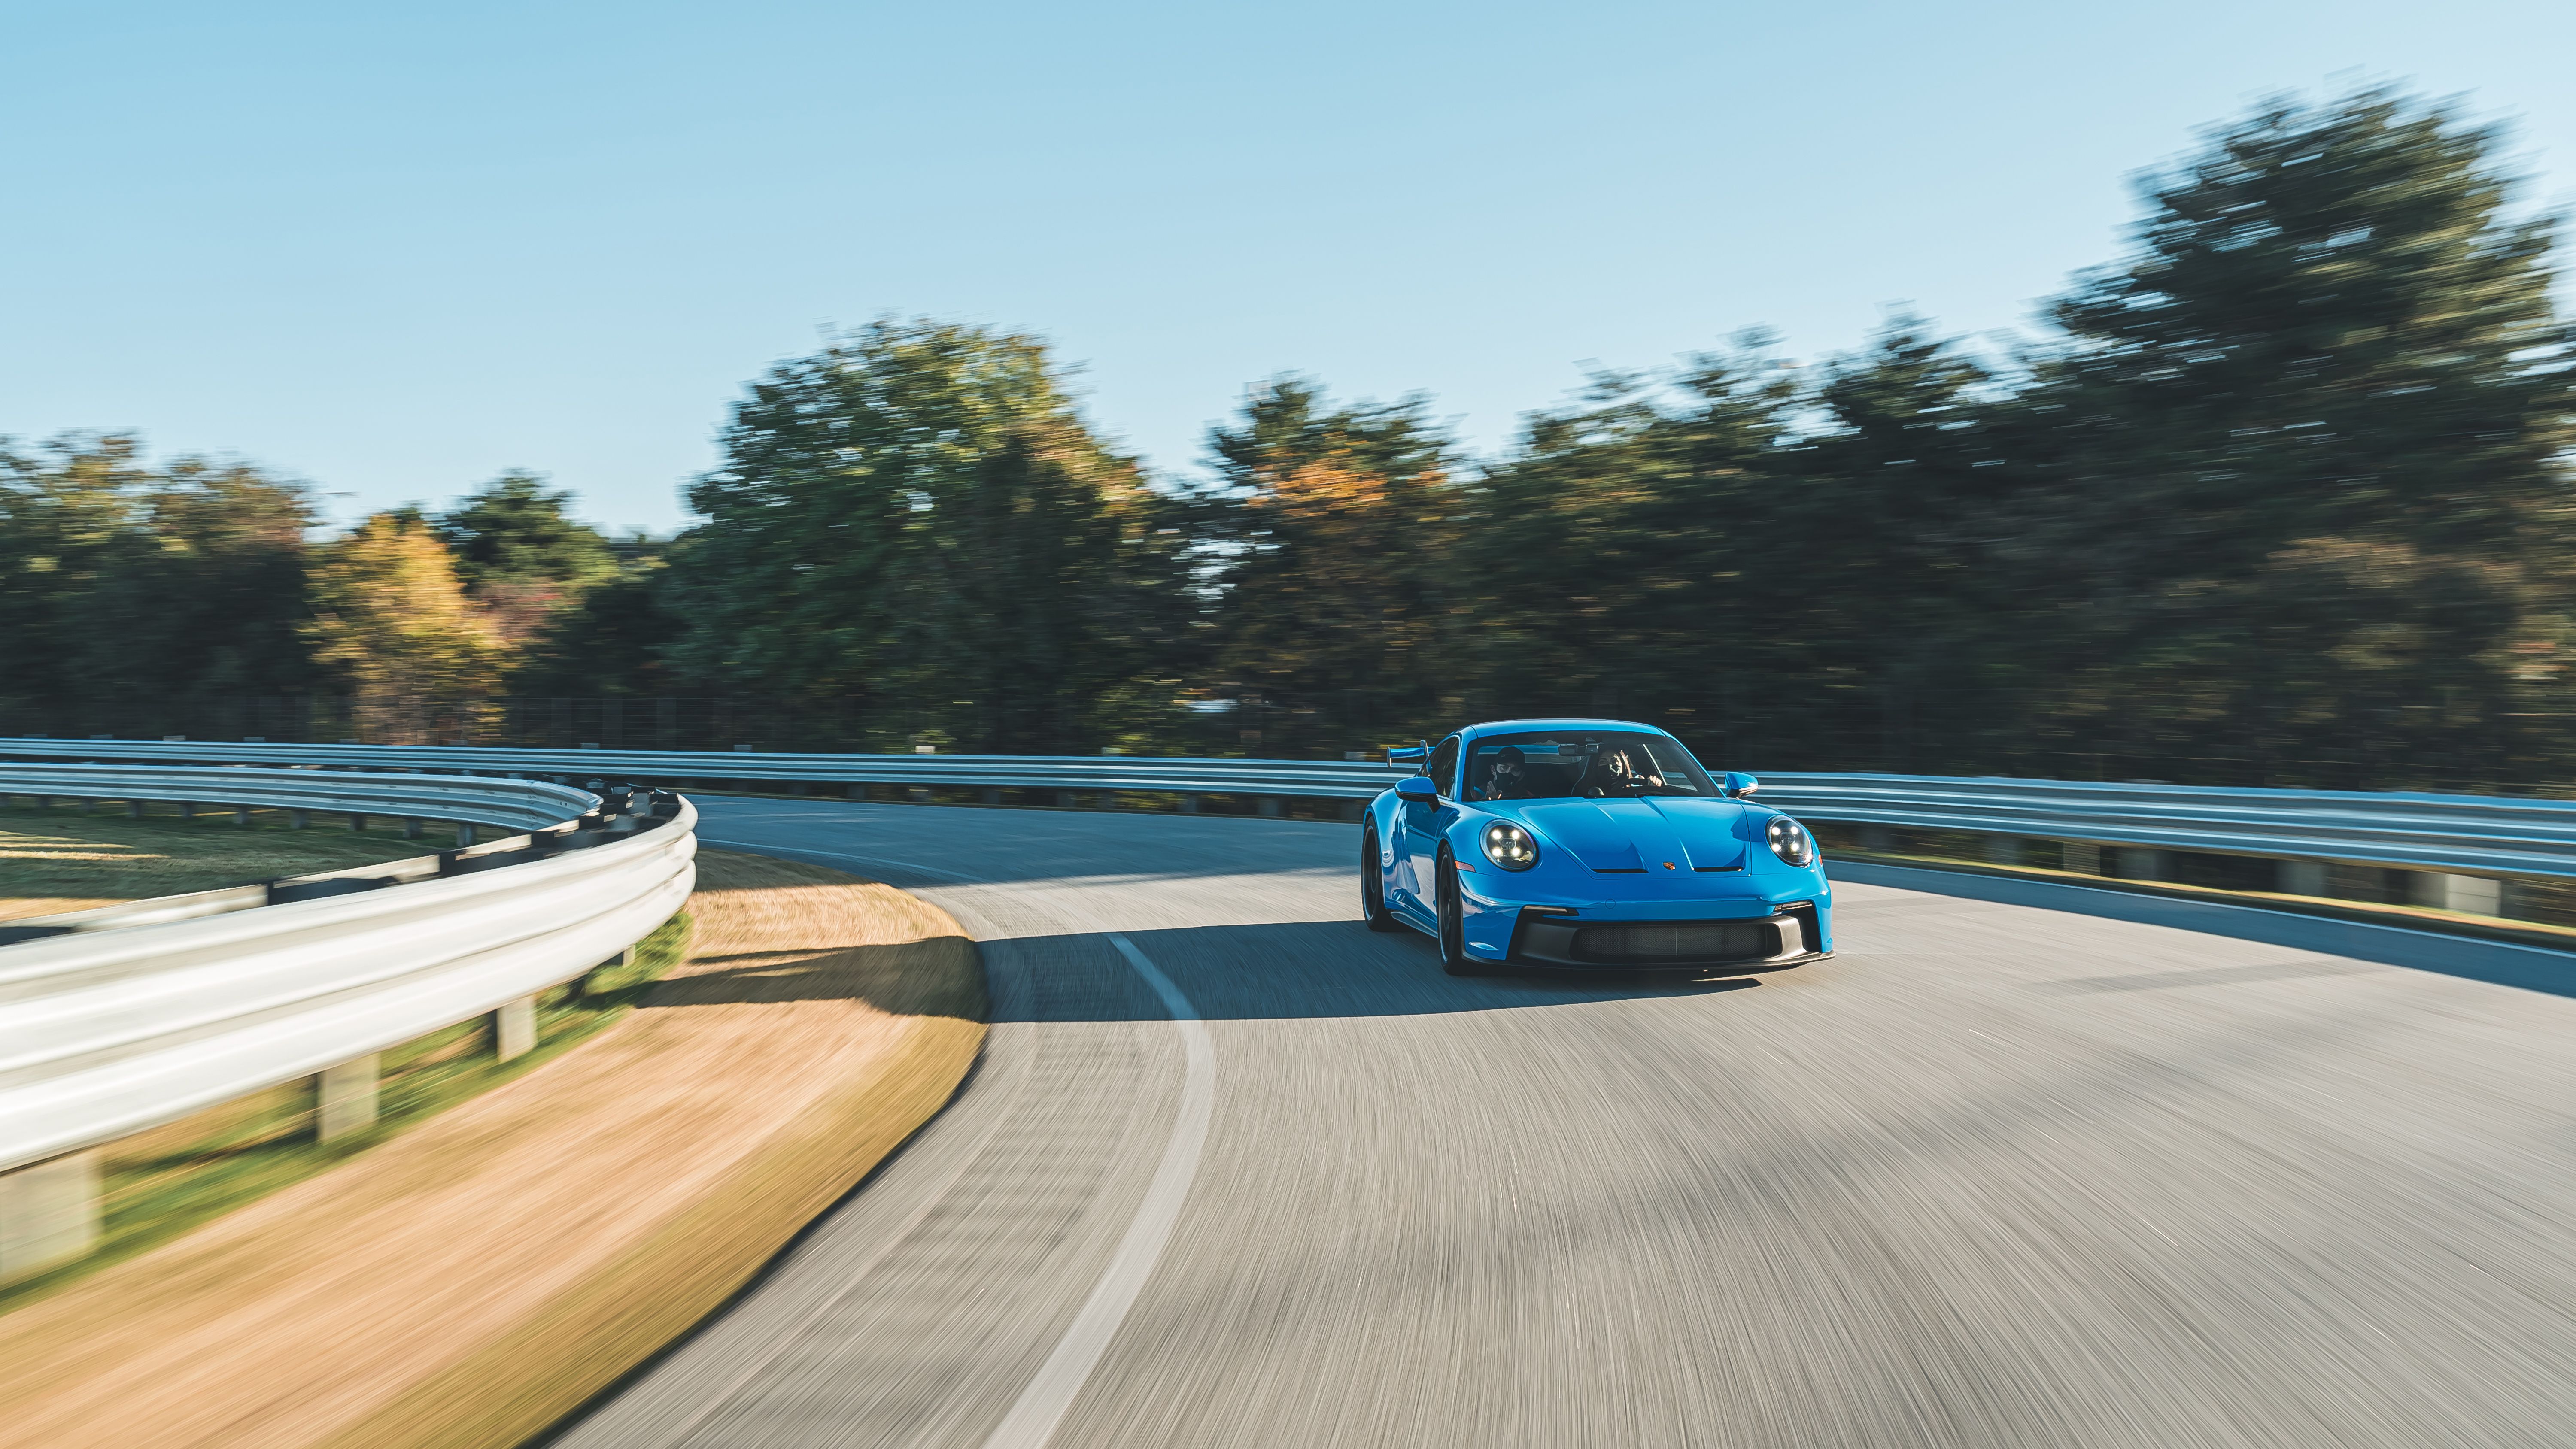 Latest 911 GT3 now available to drive at the Porsche Experience Centers in Atlanta and Los Angeles